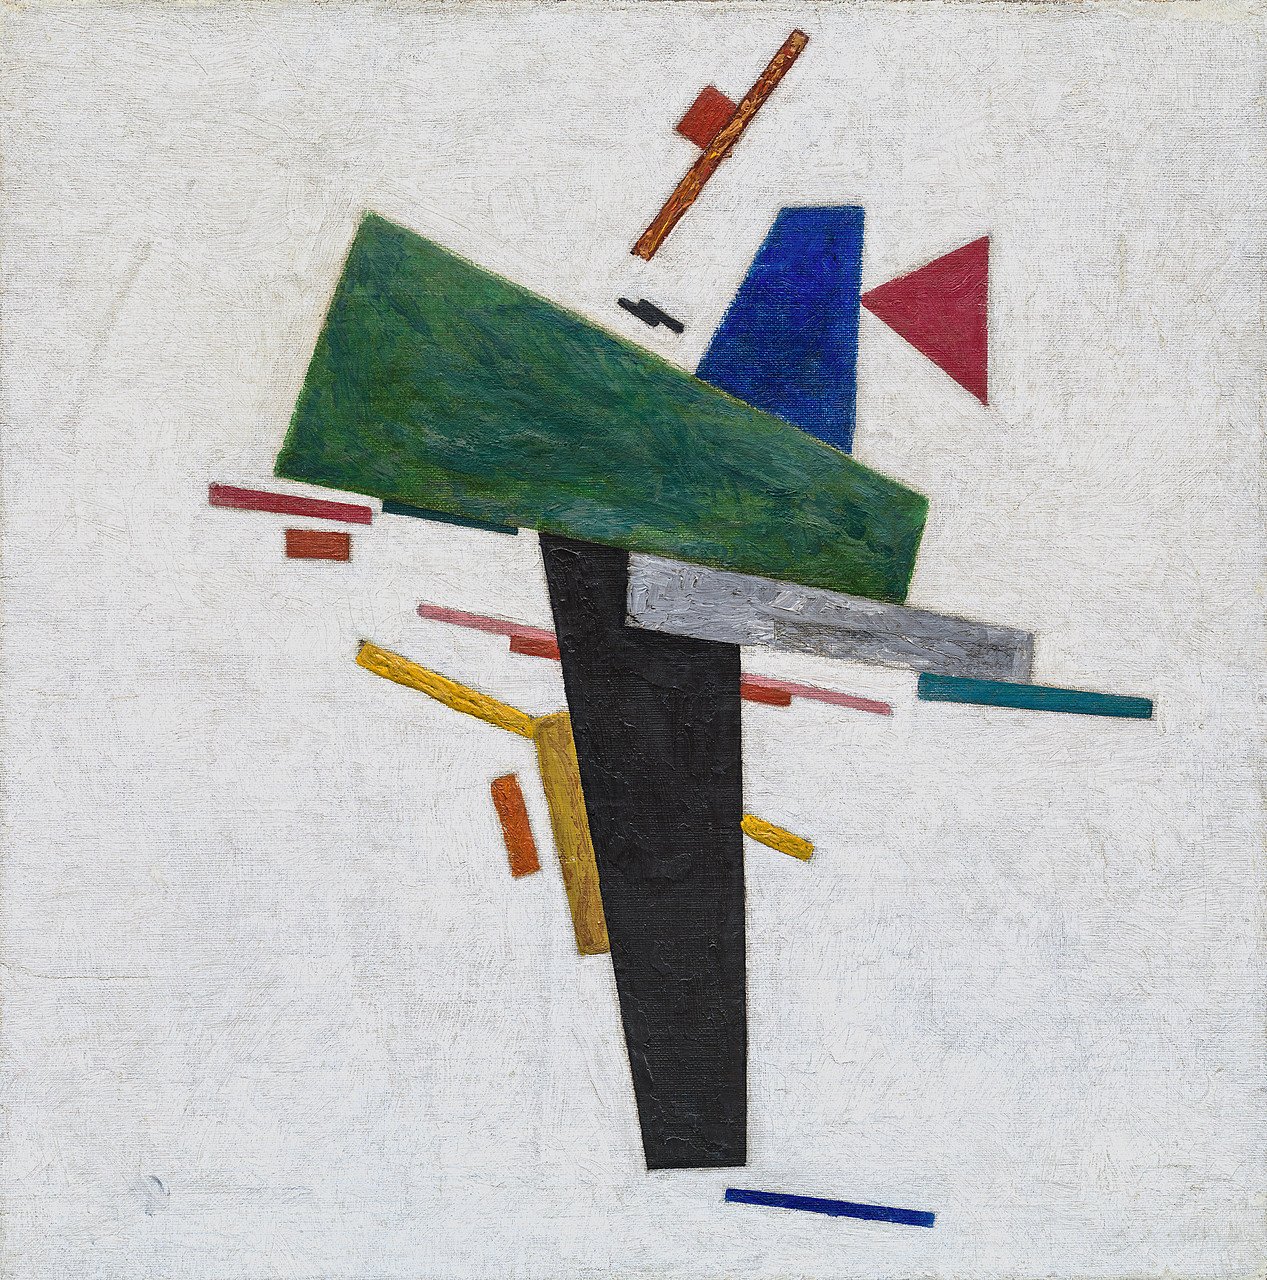 "Untitled" by Kazimir Malevich, 1916, depicting a cruciform composition with geometric shapes and bold colors.